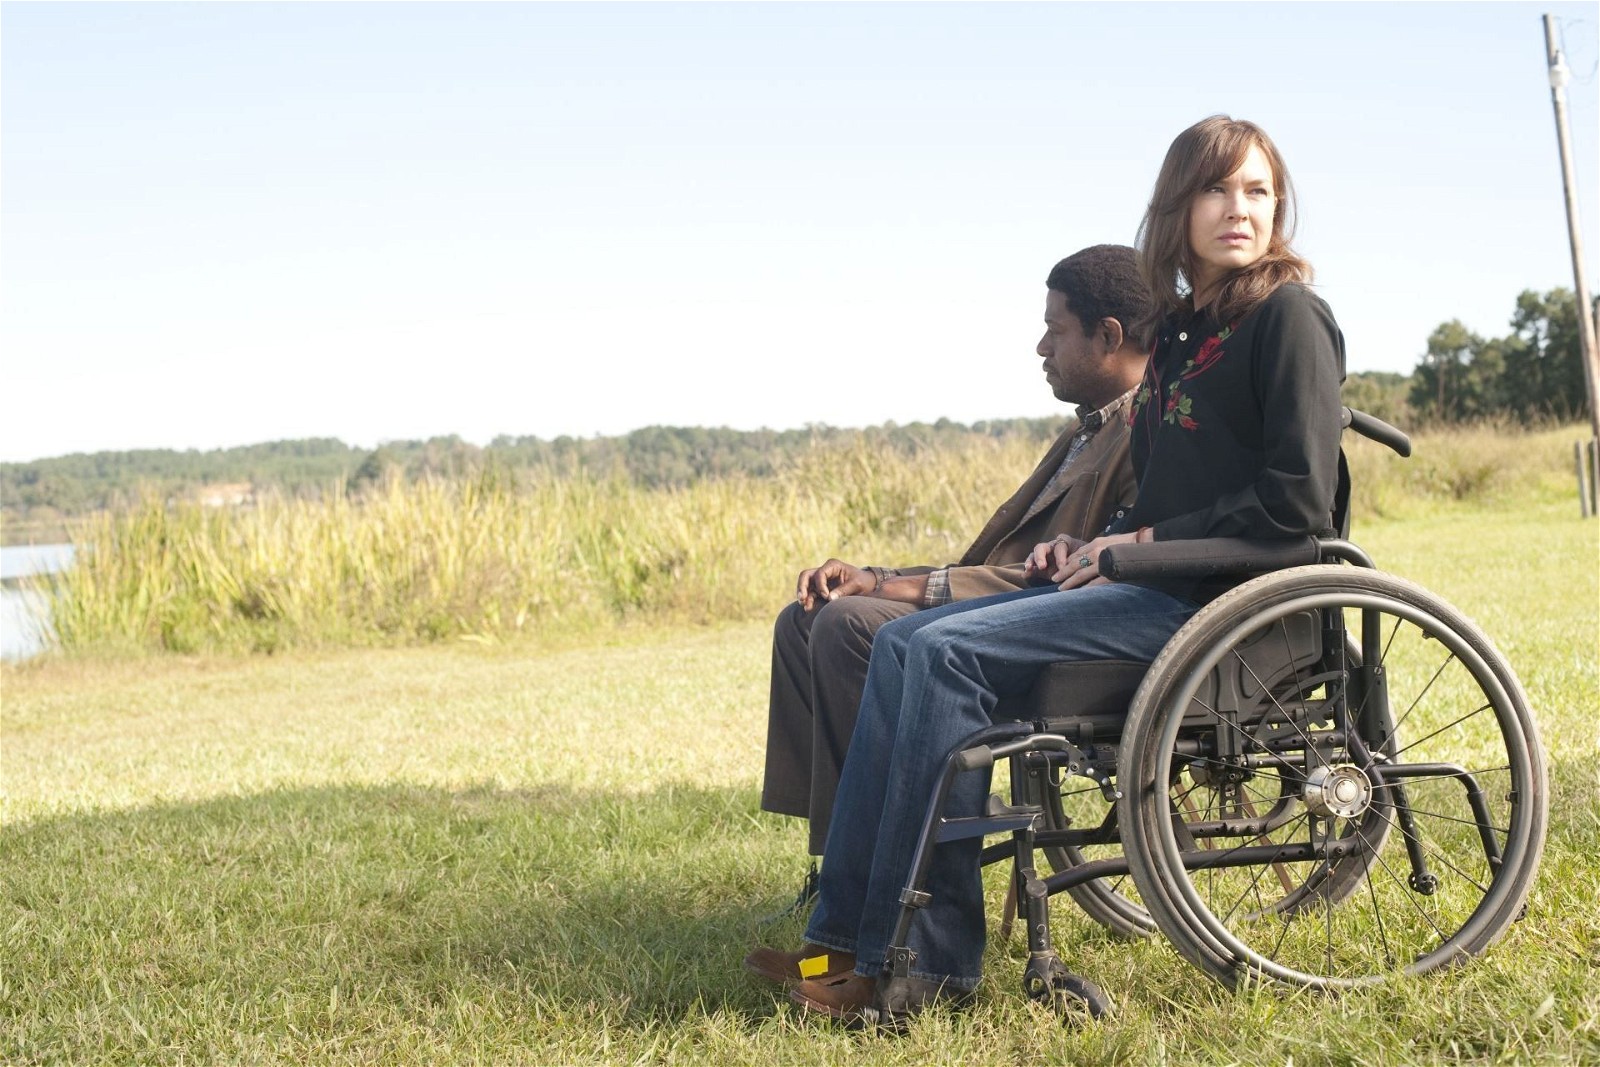 A still from Forest Whitaker's movie My Own Love Song